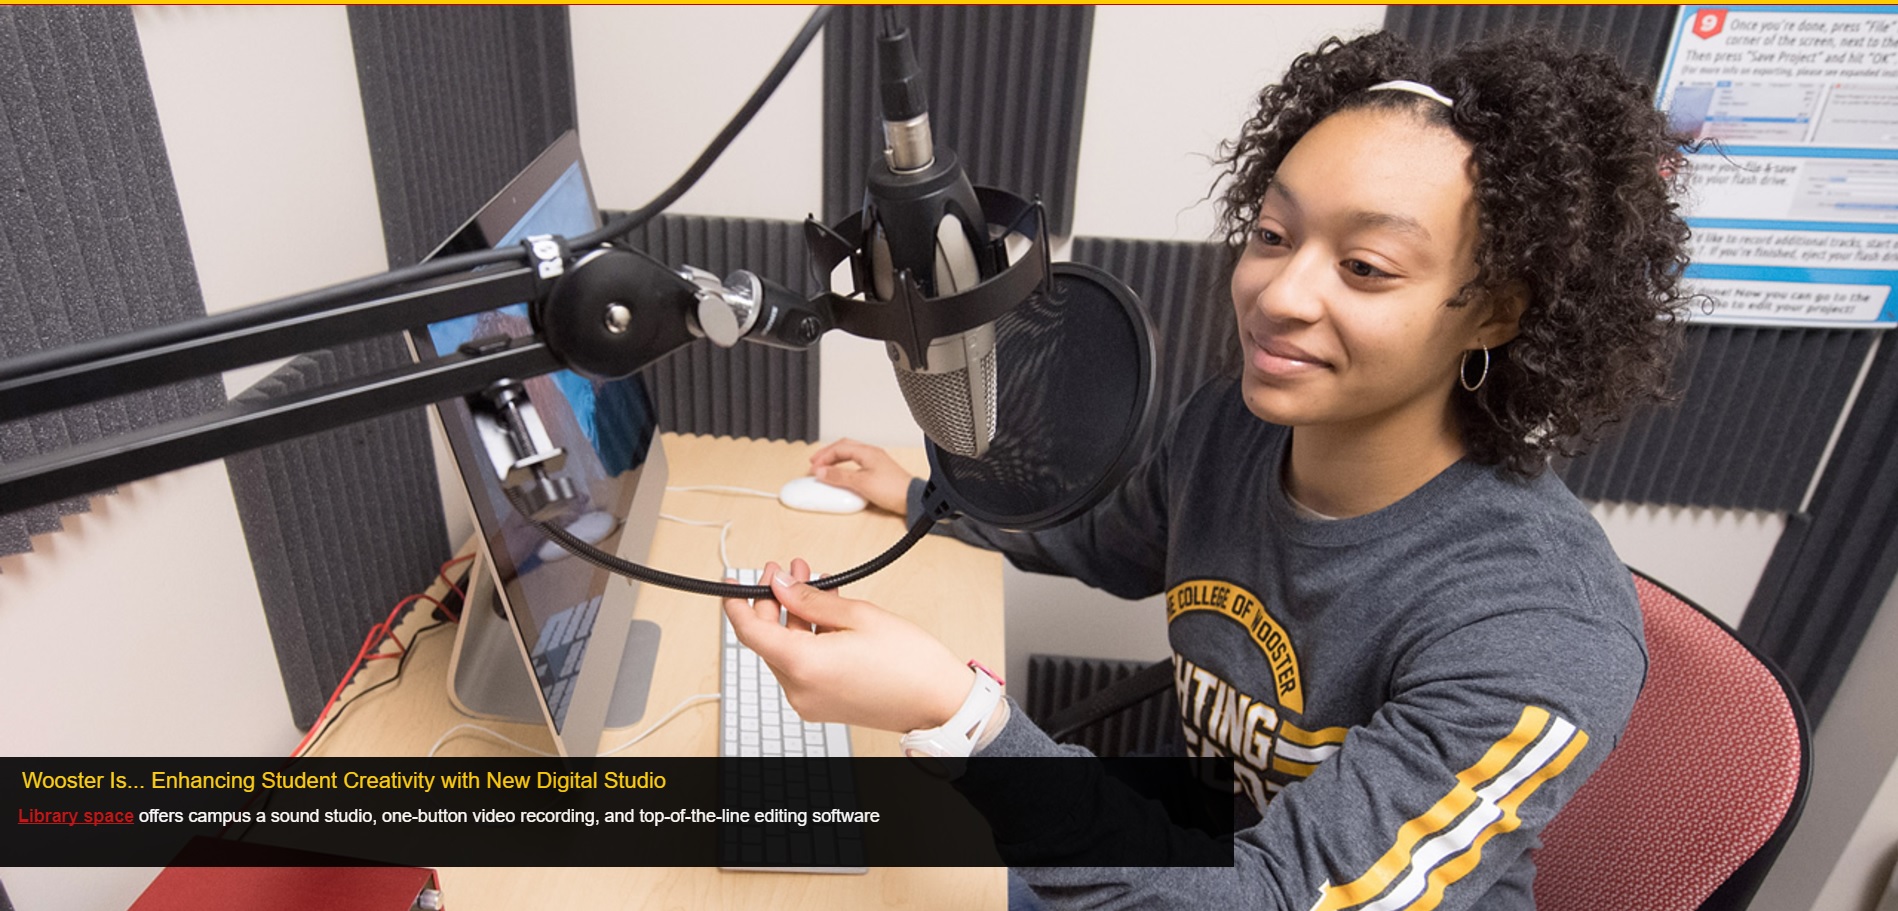 The College of Wooster's feature of the Digital Studio on their website.